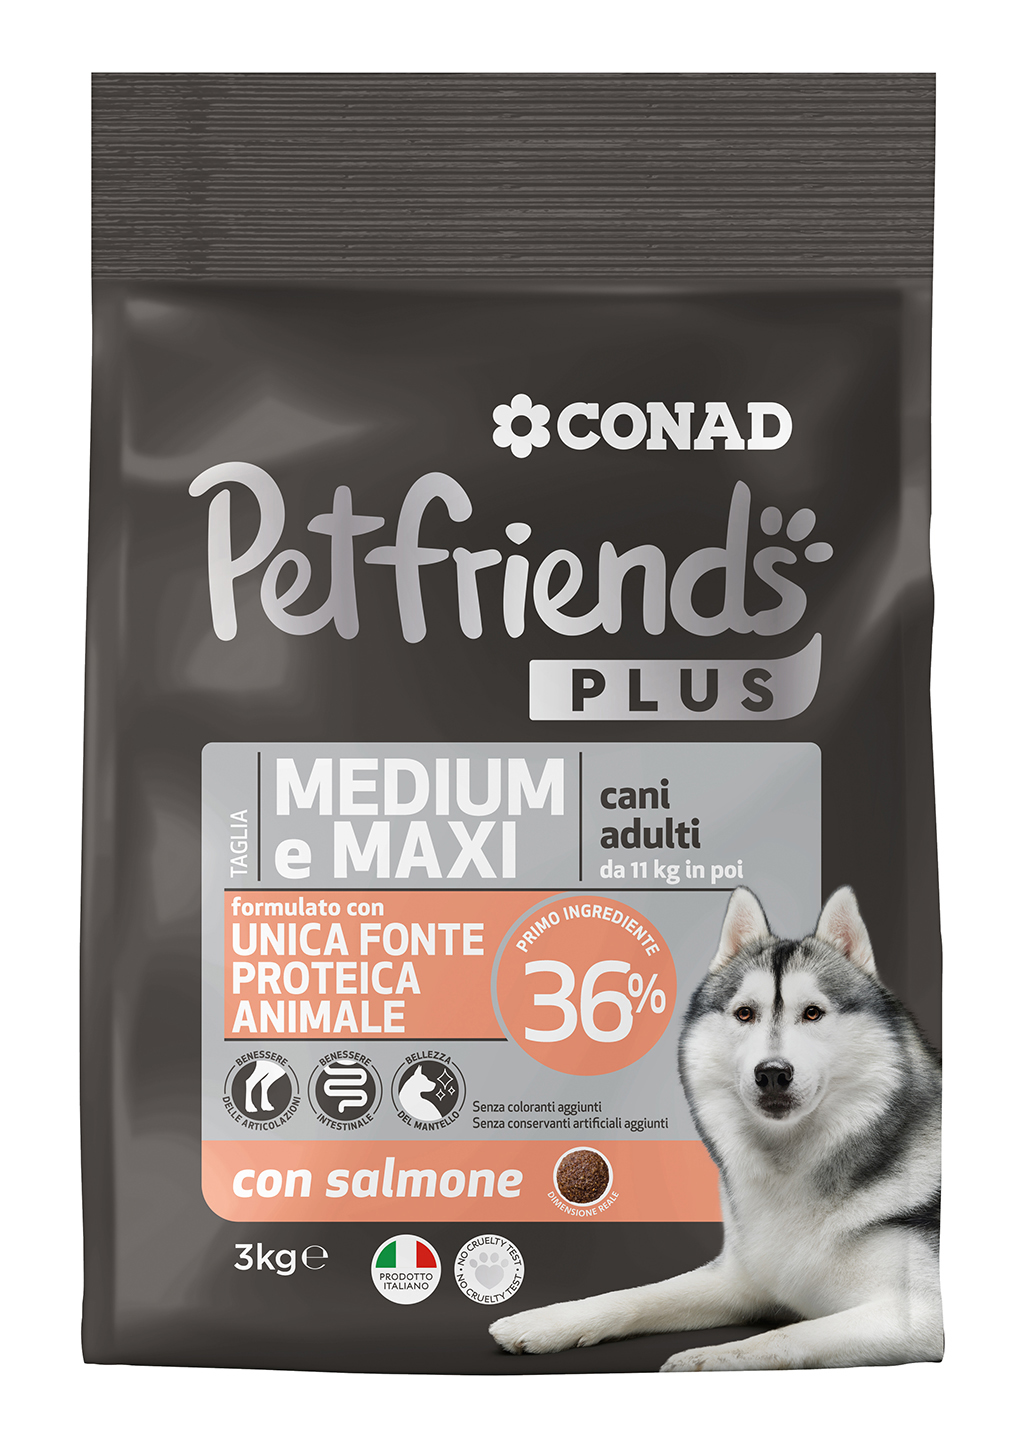 PETFRIENDS PLUS CONAD CROQUETTES FOR DOGS ONLY PROTEIN SOURCE - PORK / SALMON - 3 KG